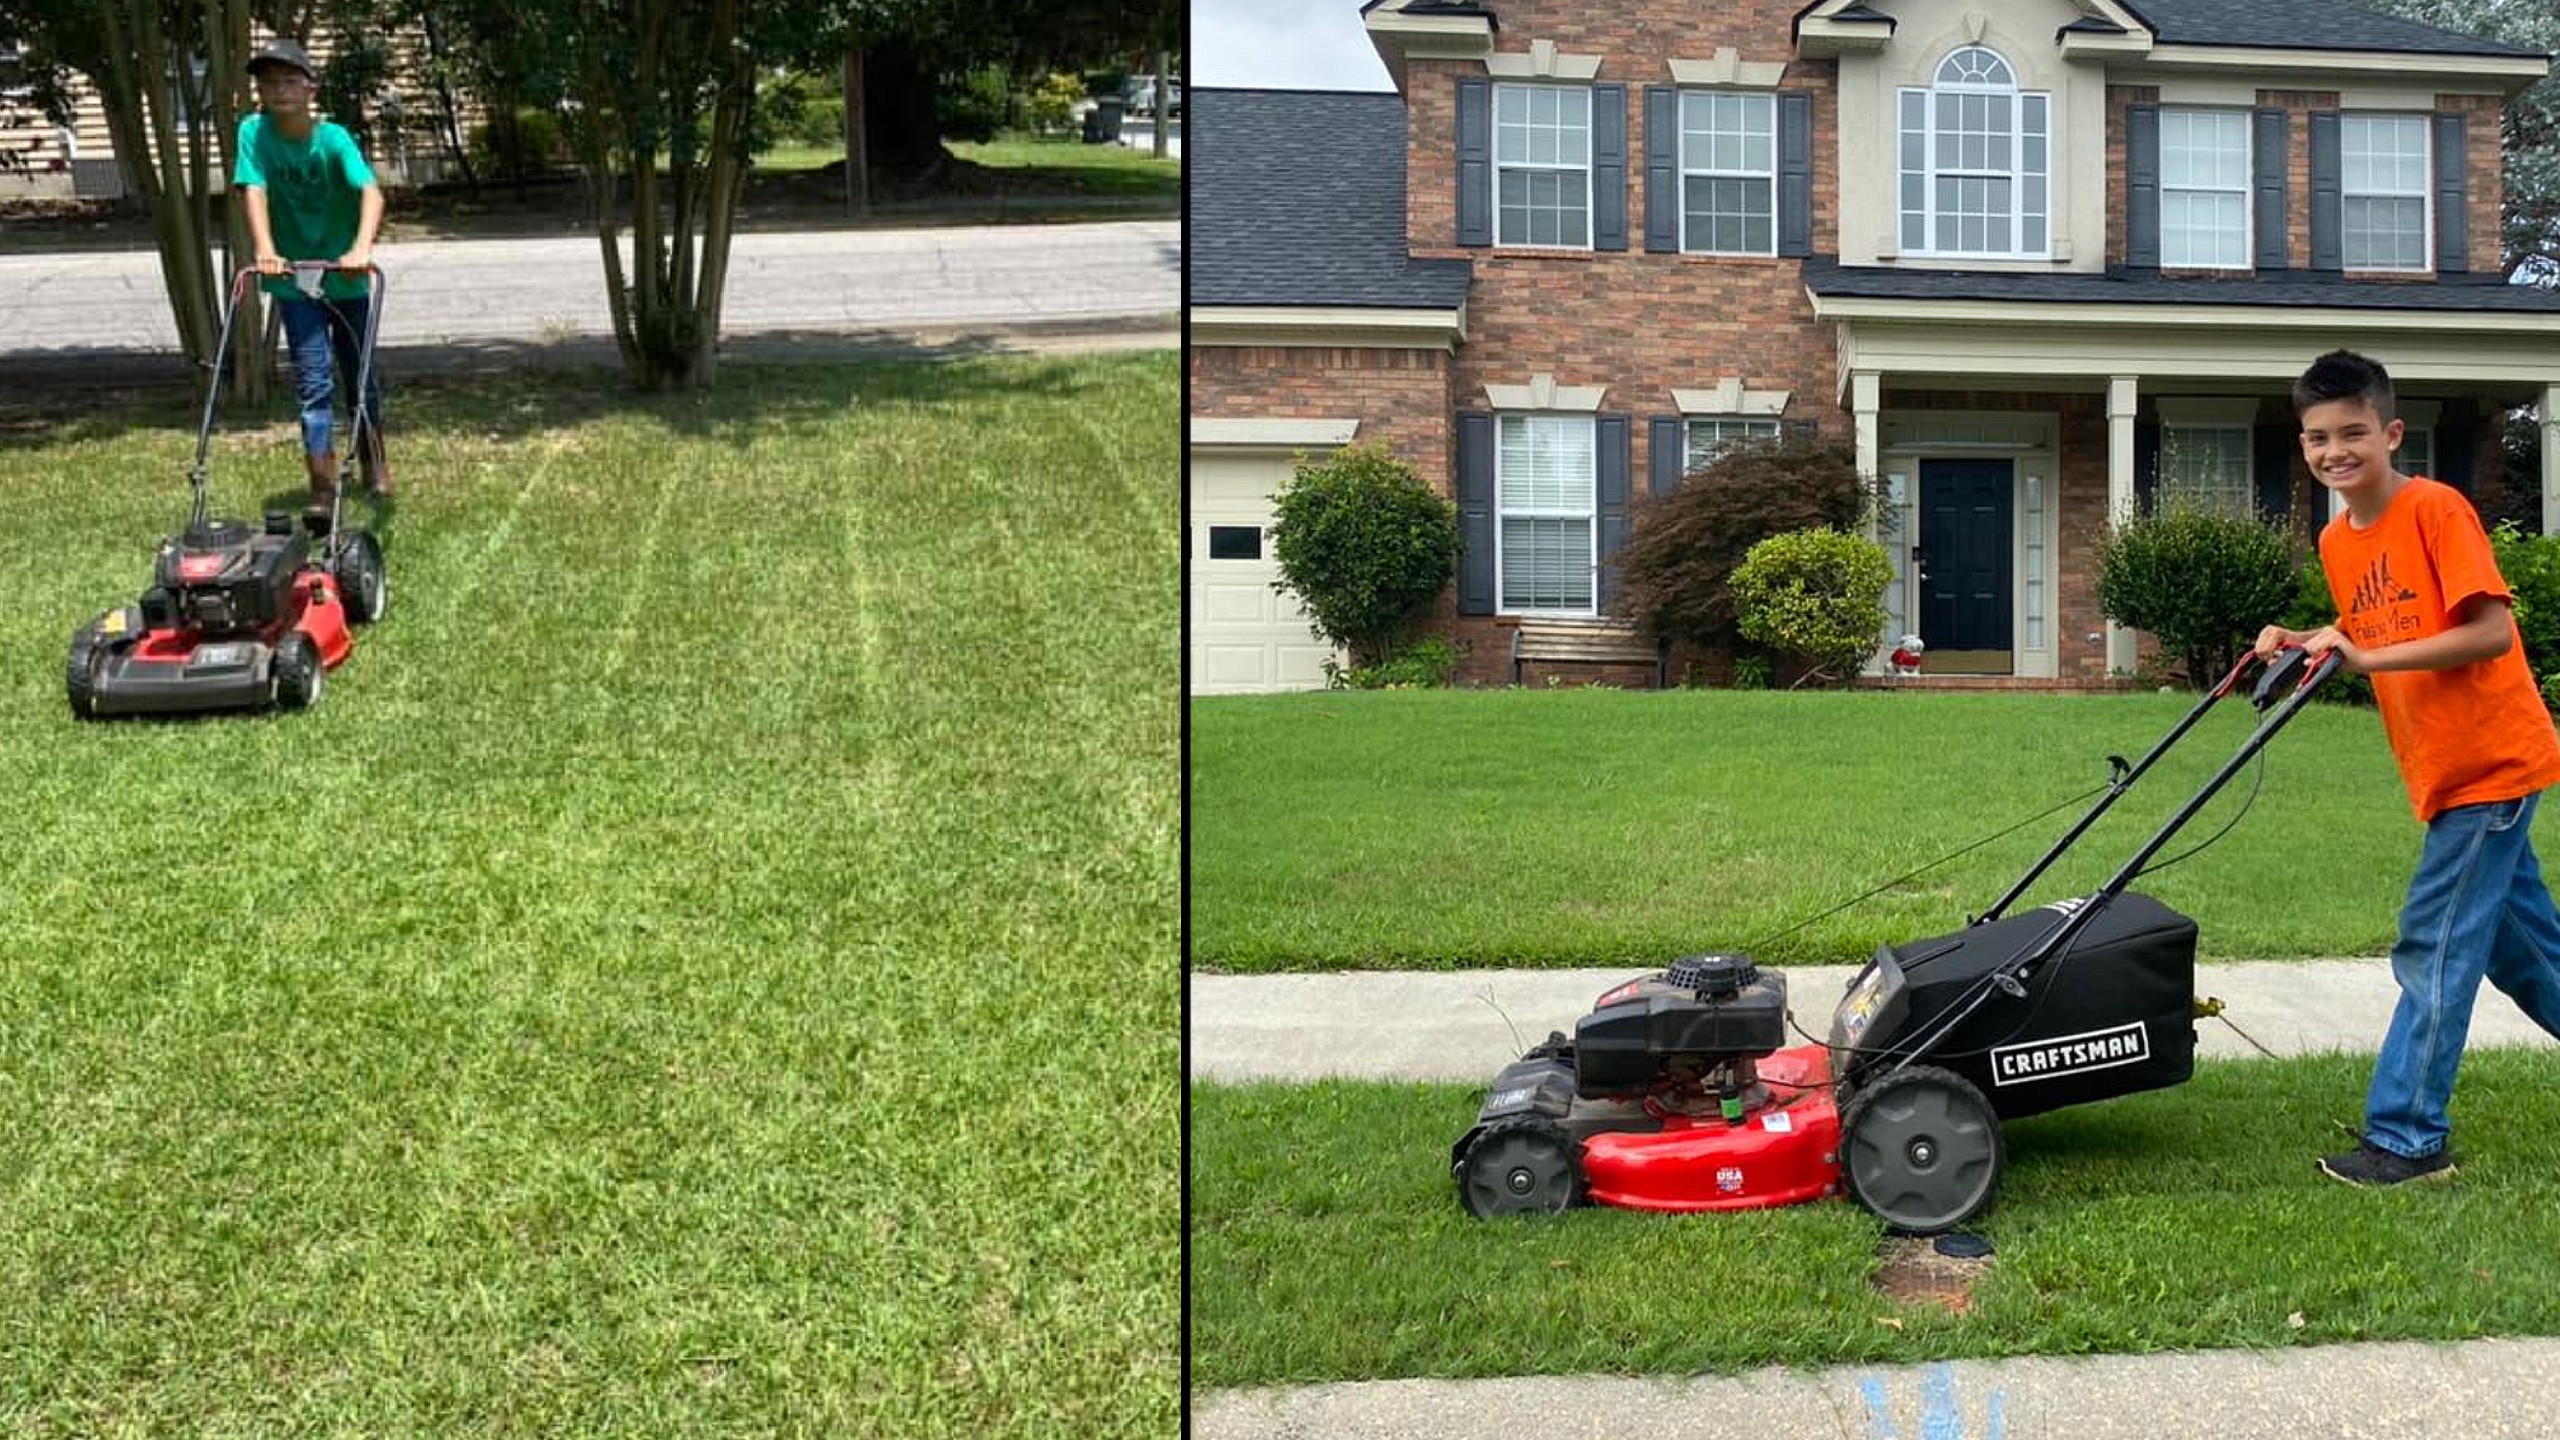 11-Year-Old mows 50 lawns for free